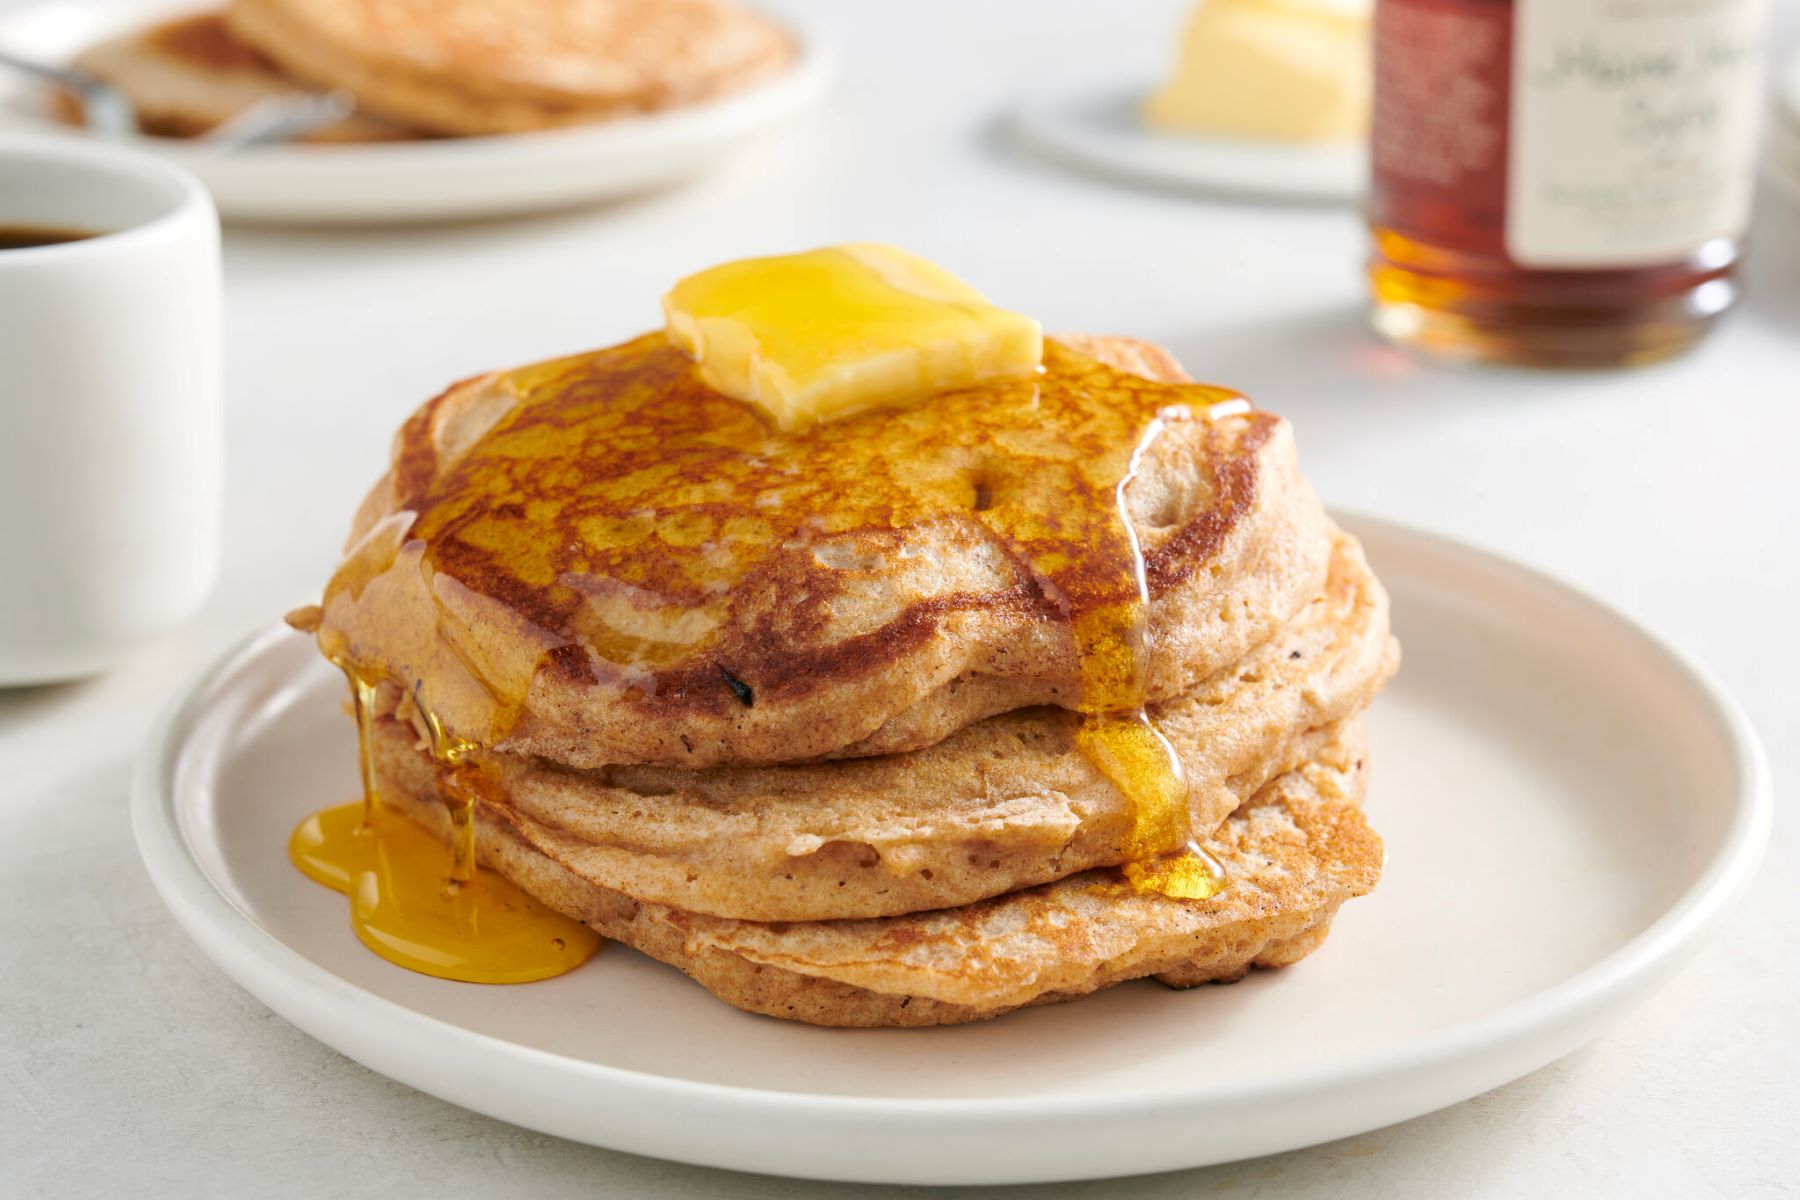 Healthy Pancake: Delicious Whole Grain Pancakes For Foodie Friday